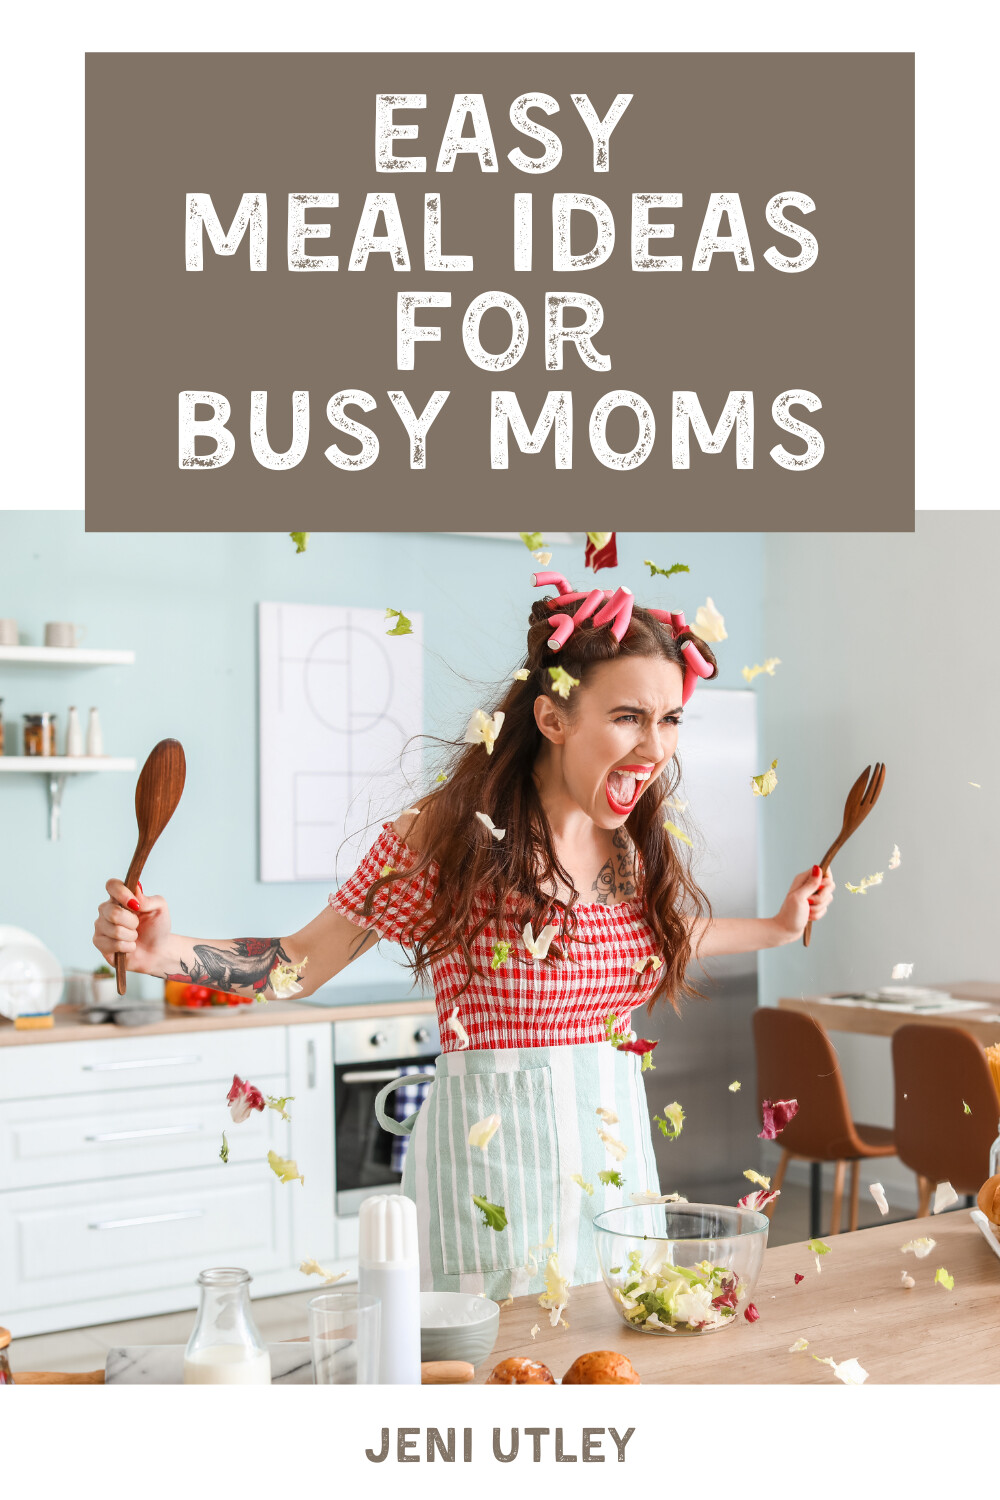 Easy Meals Ideas for Busy Moms